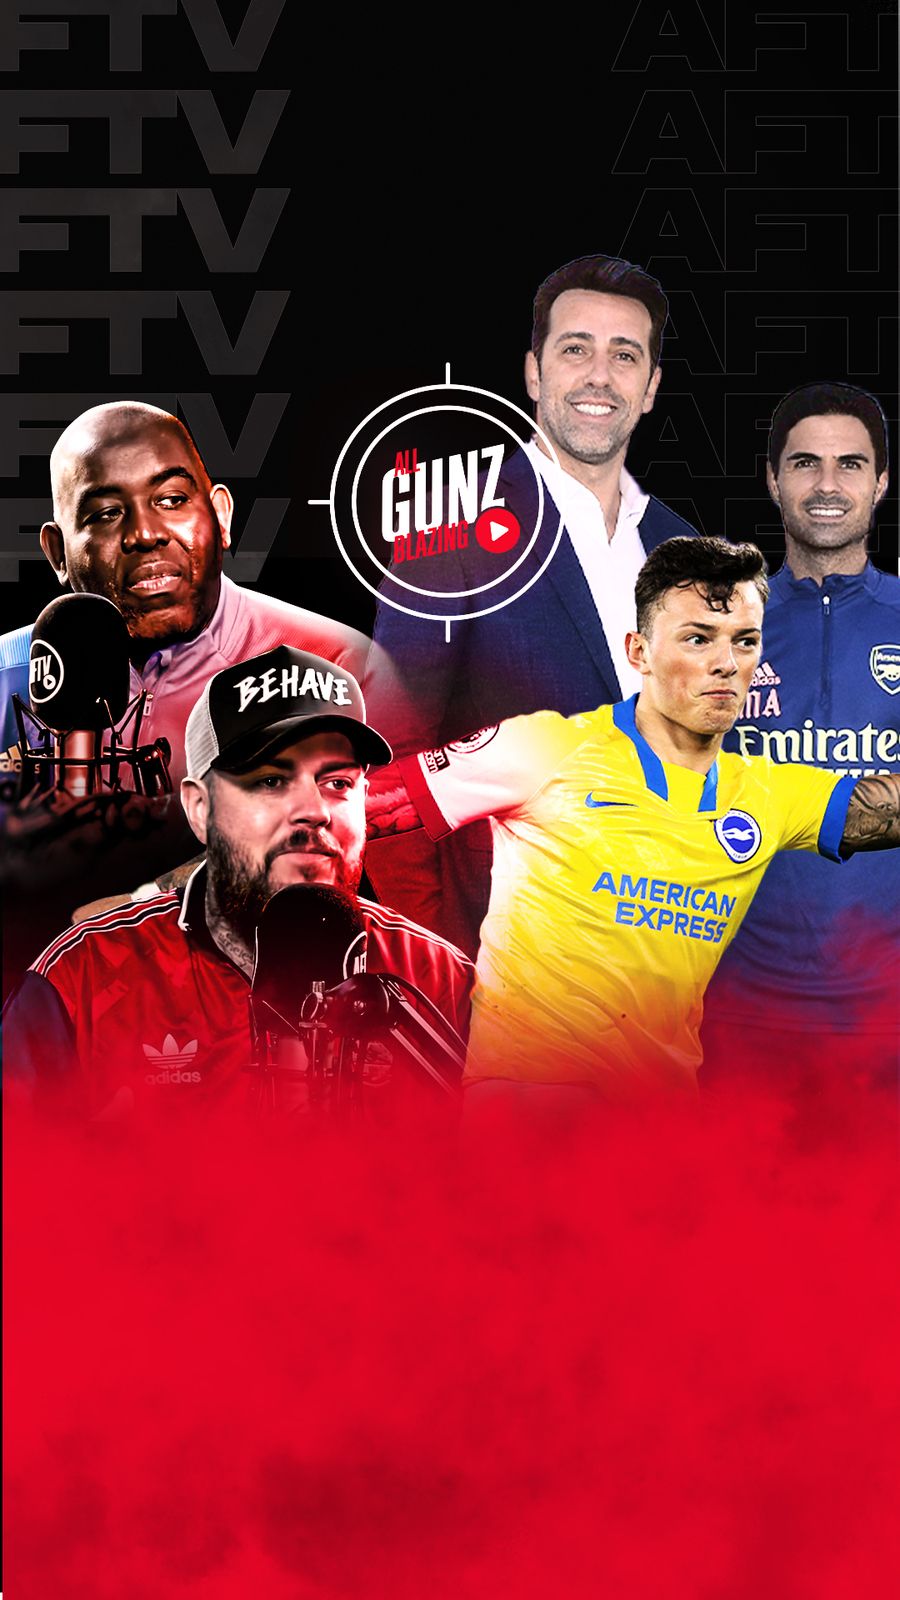 S3 Ep100: Will Arsenal Get Their Transfer Priorities Right? | All Gunz Blazing Podcast Ft. DT